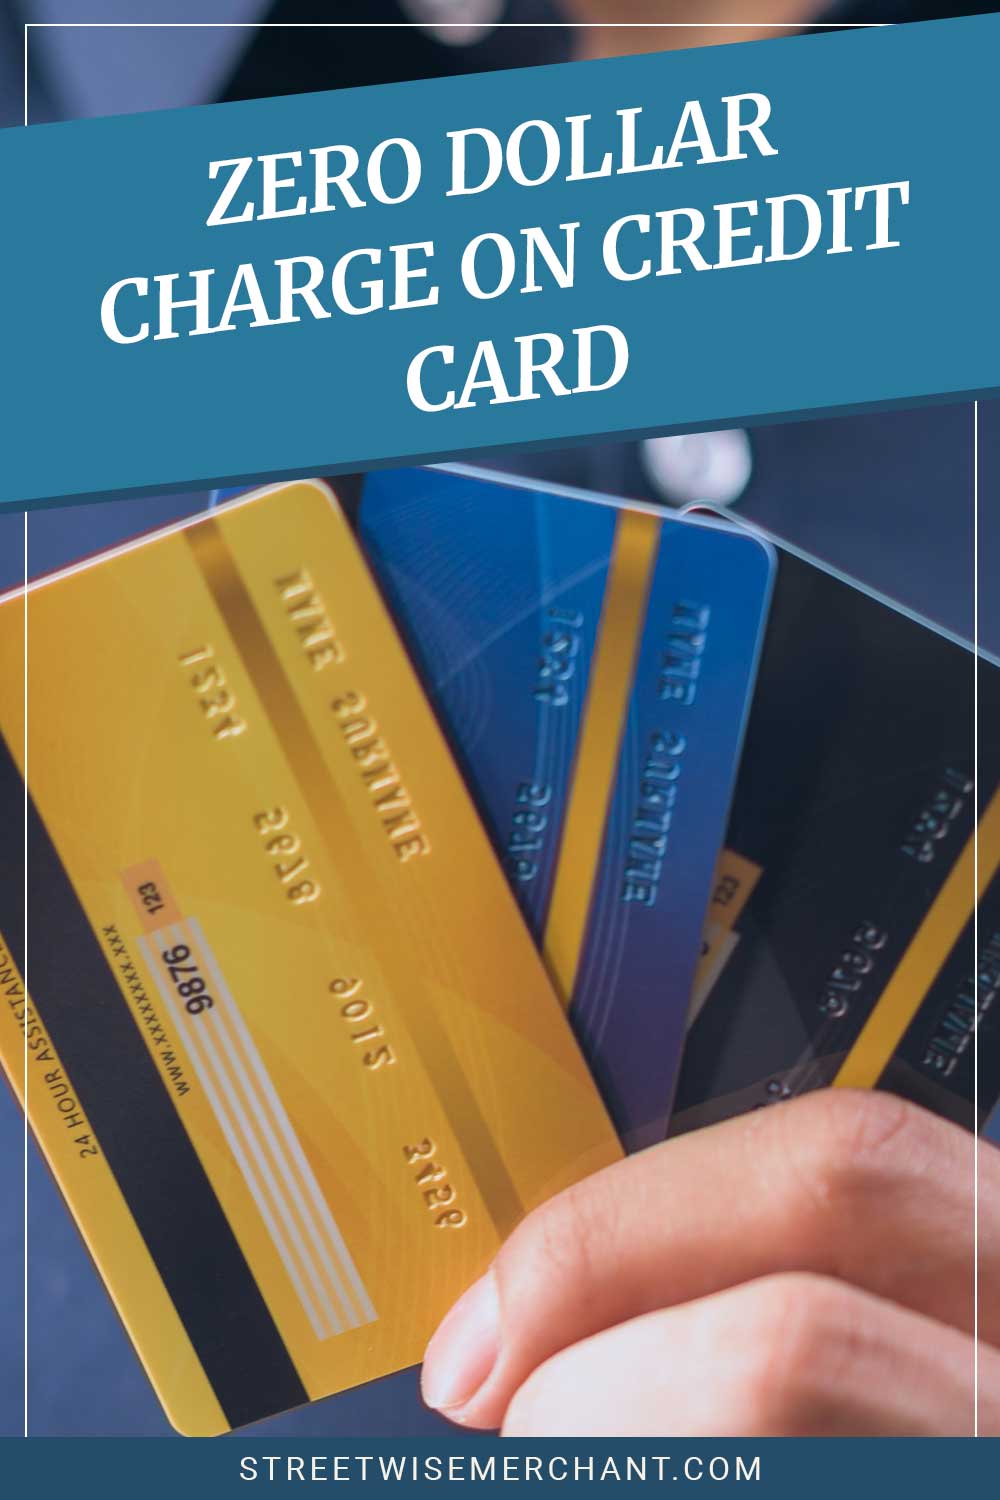 Some credit cards in a hand - Zero Dollar Charge On Credit Card.